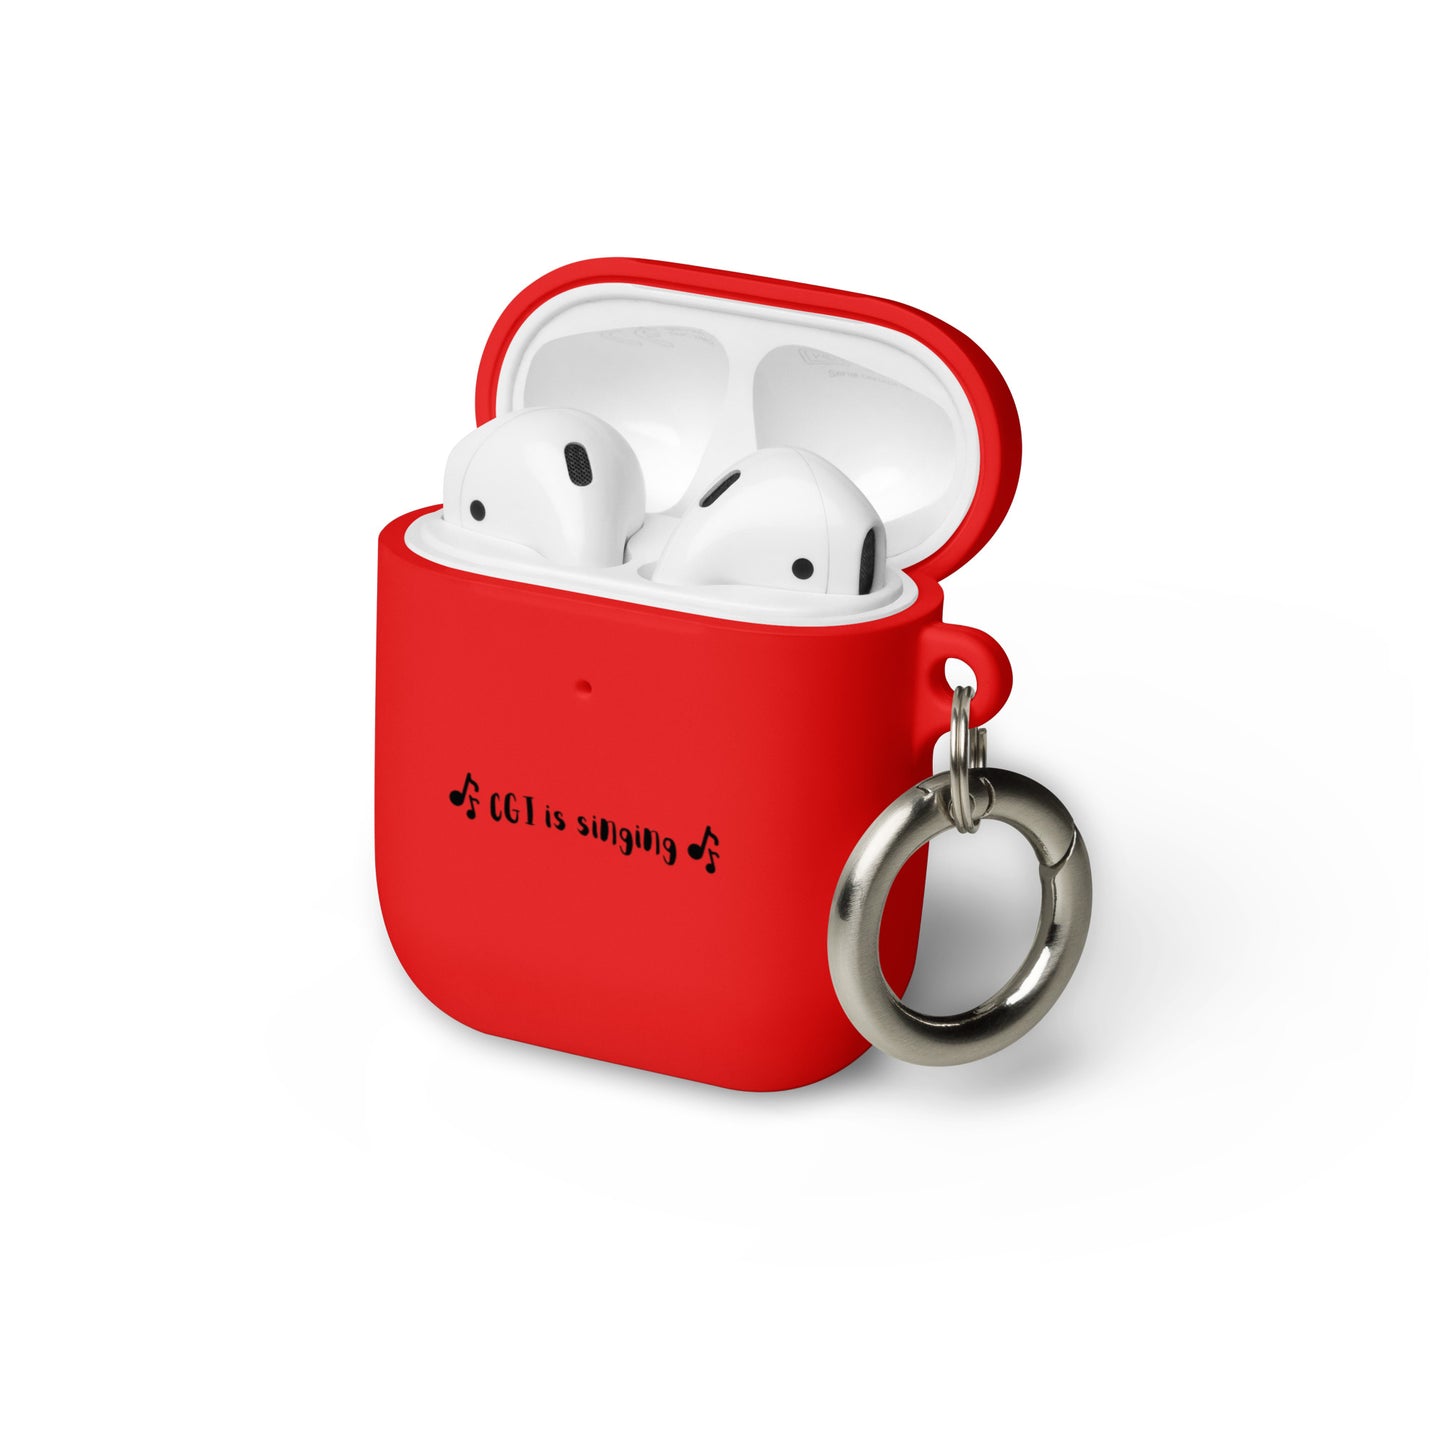 AirPods case "CGI is singing"